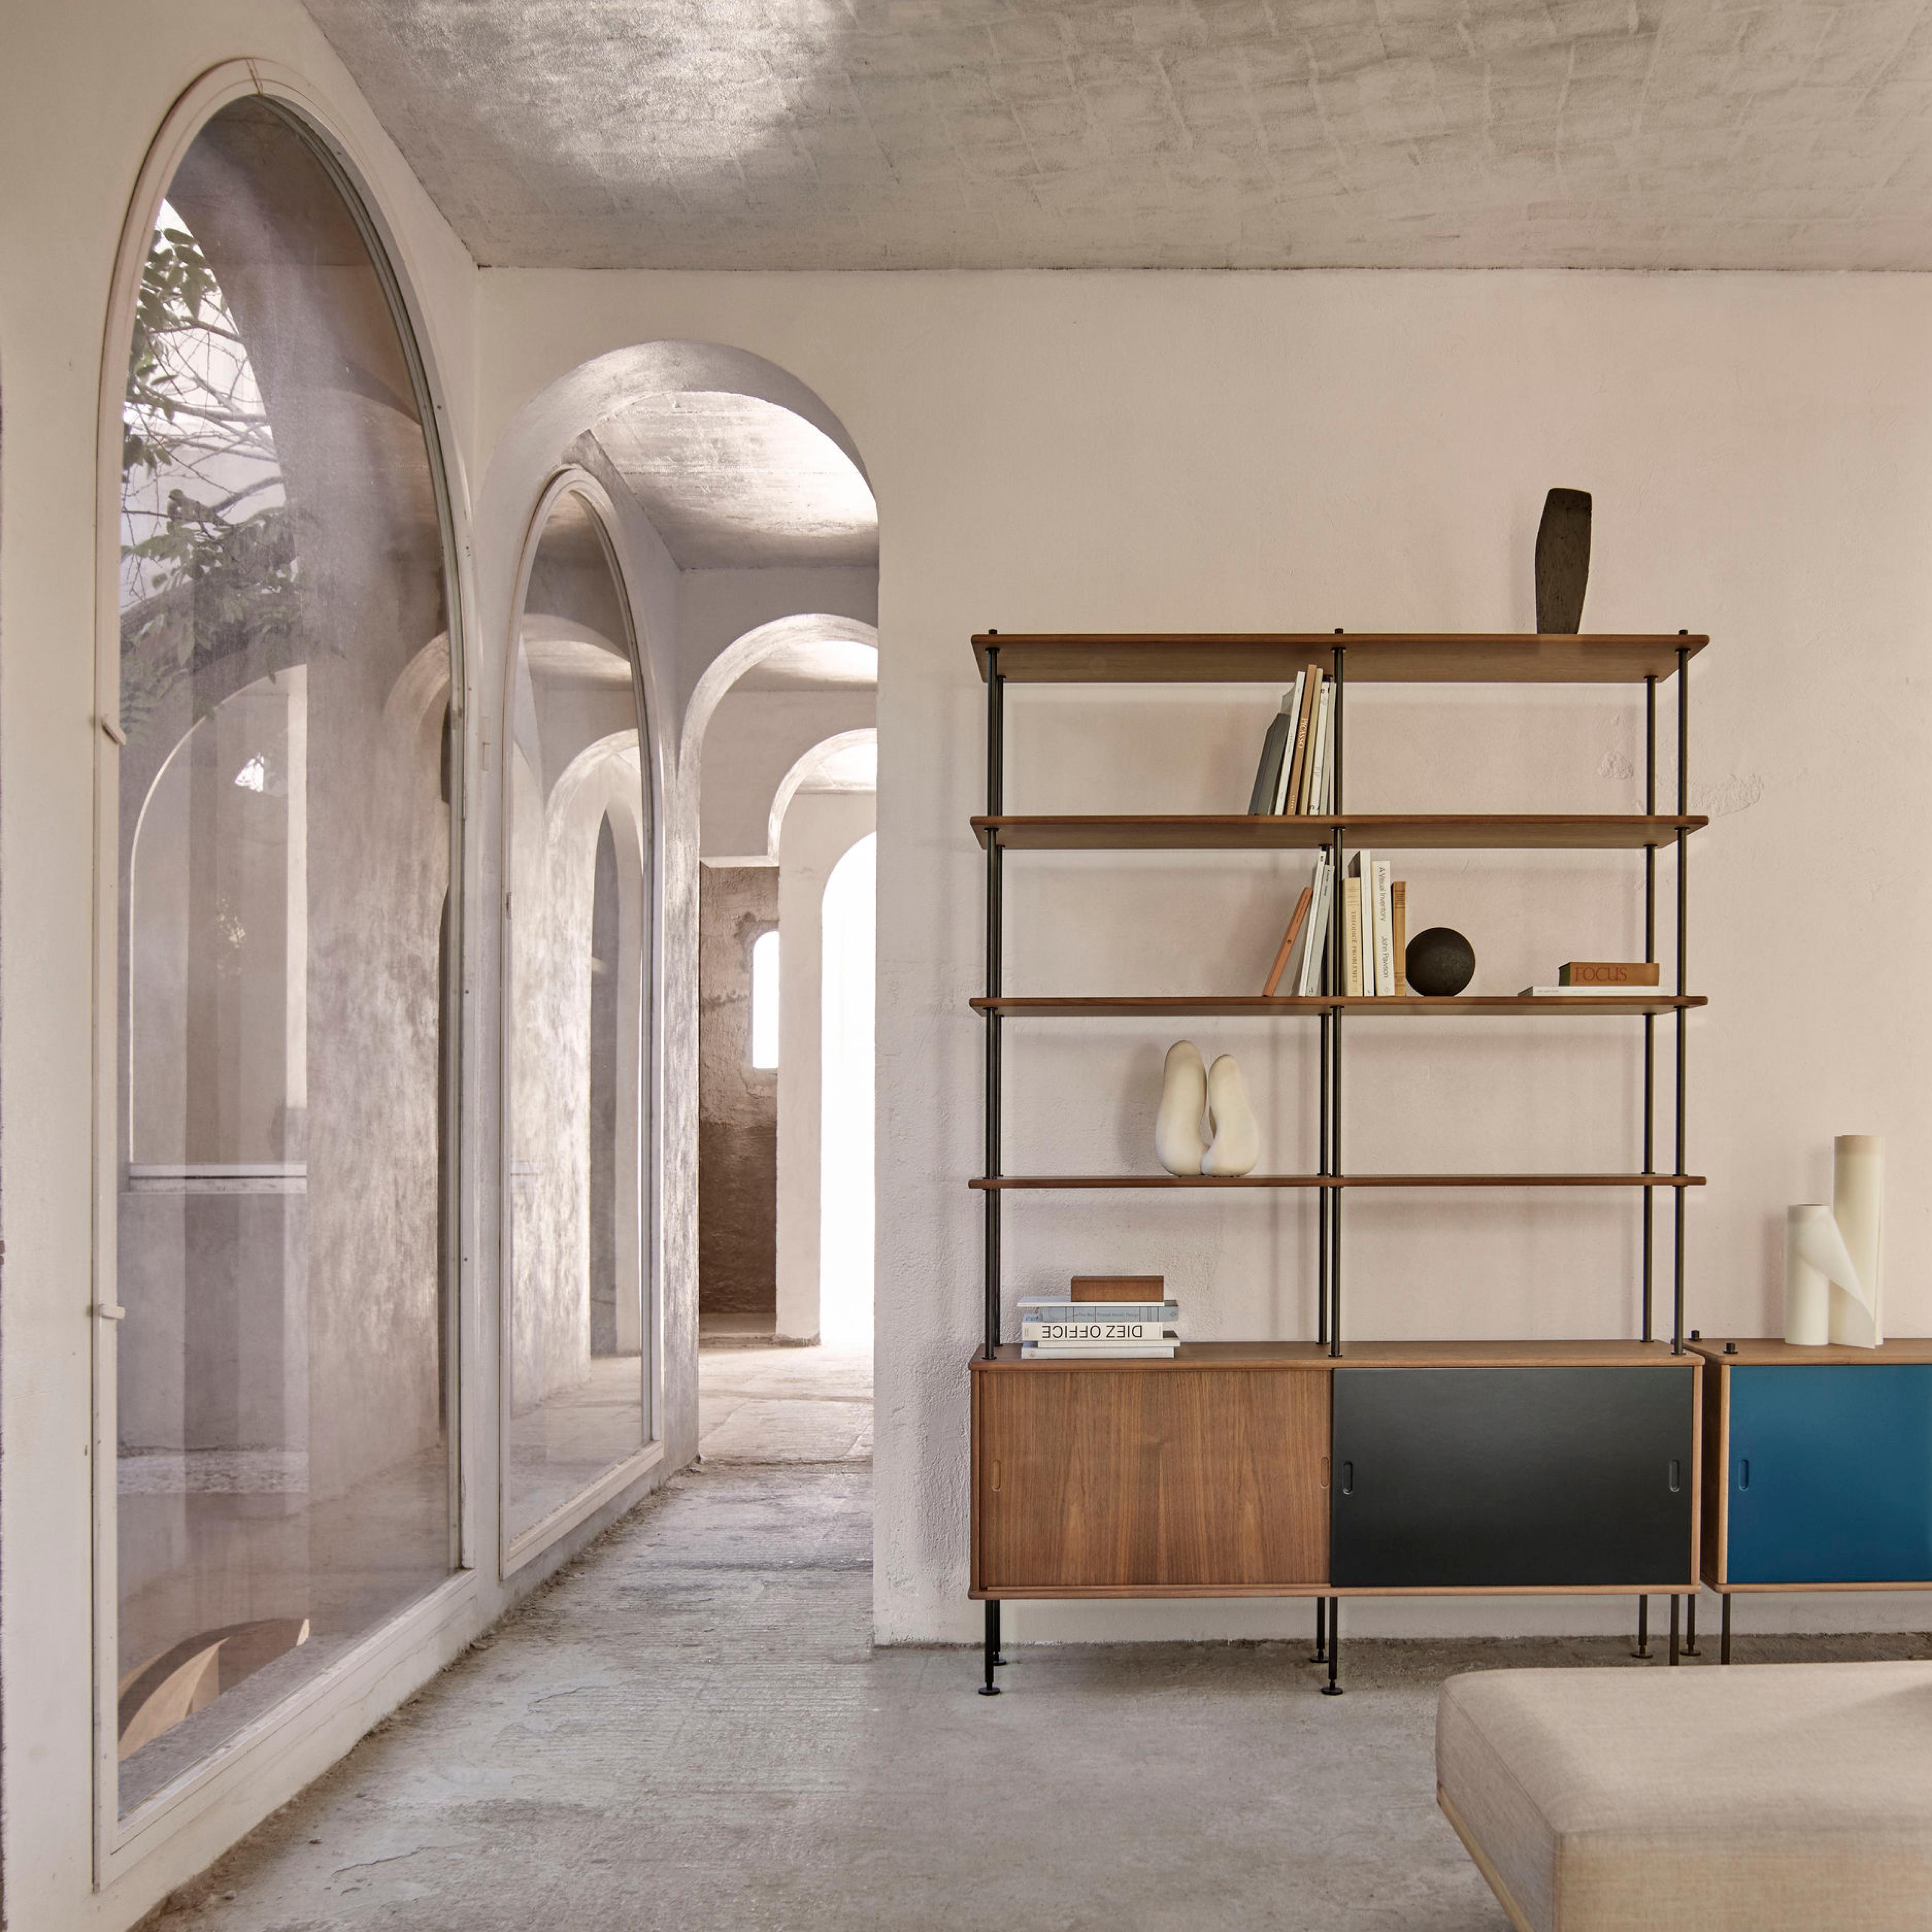 Originally designed in 1958, Carl Hansen & Søn puts Børge Mogensen’s modular shelving system into production for the very first time. Minimalist and modular, the tubular steel FSC™-certified wood design is also available in a range of colorful